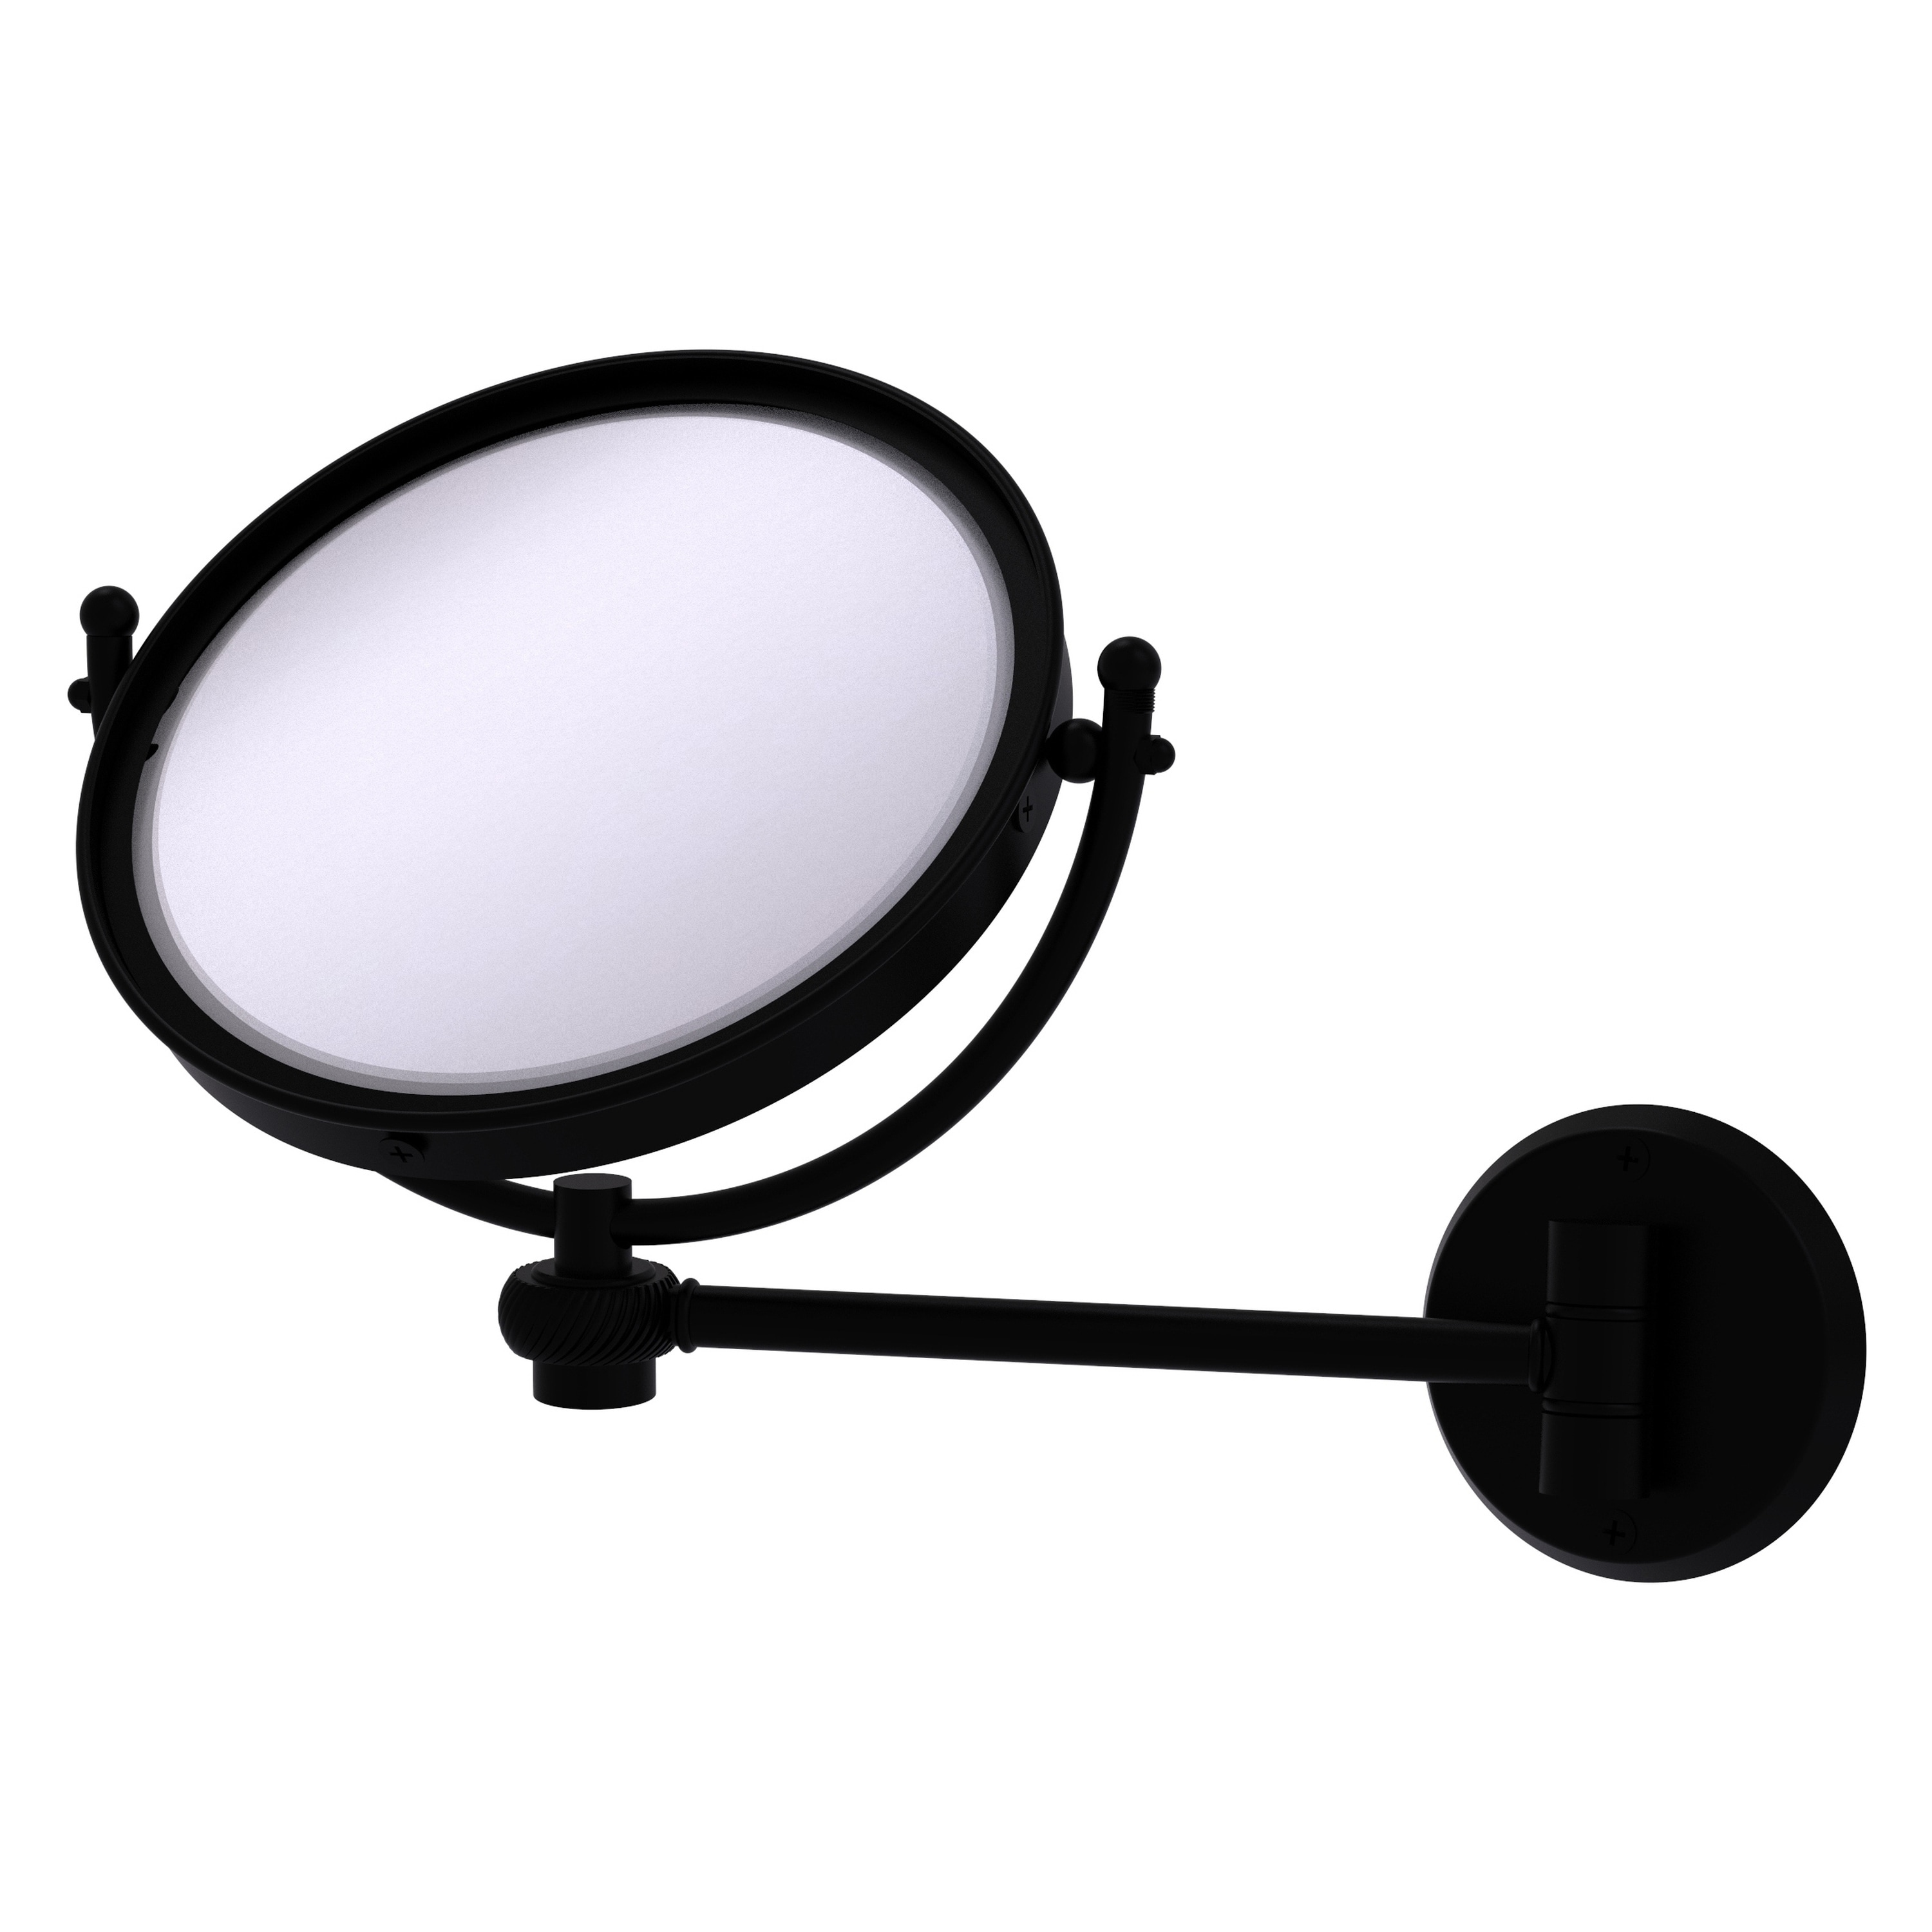 8-in x 10-in Matte Gray Double-sided 2X Magnifying Wall-mounted Vanity Mirror | - Allied Brass WM-5T/2X-BKM